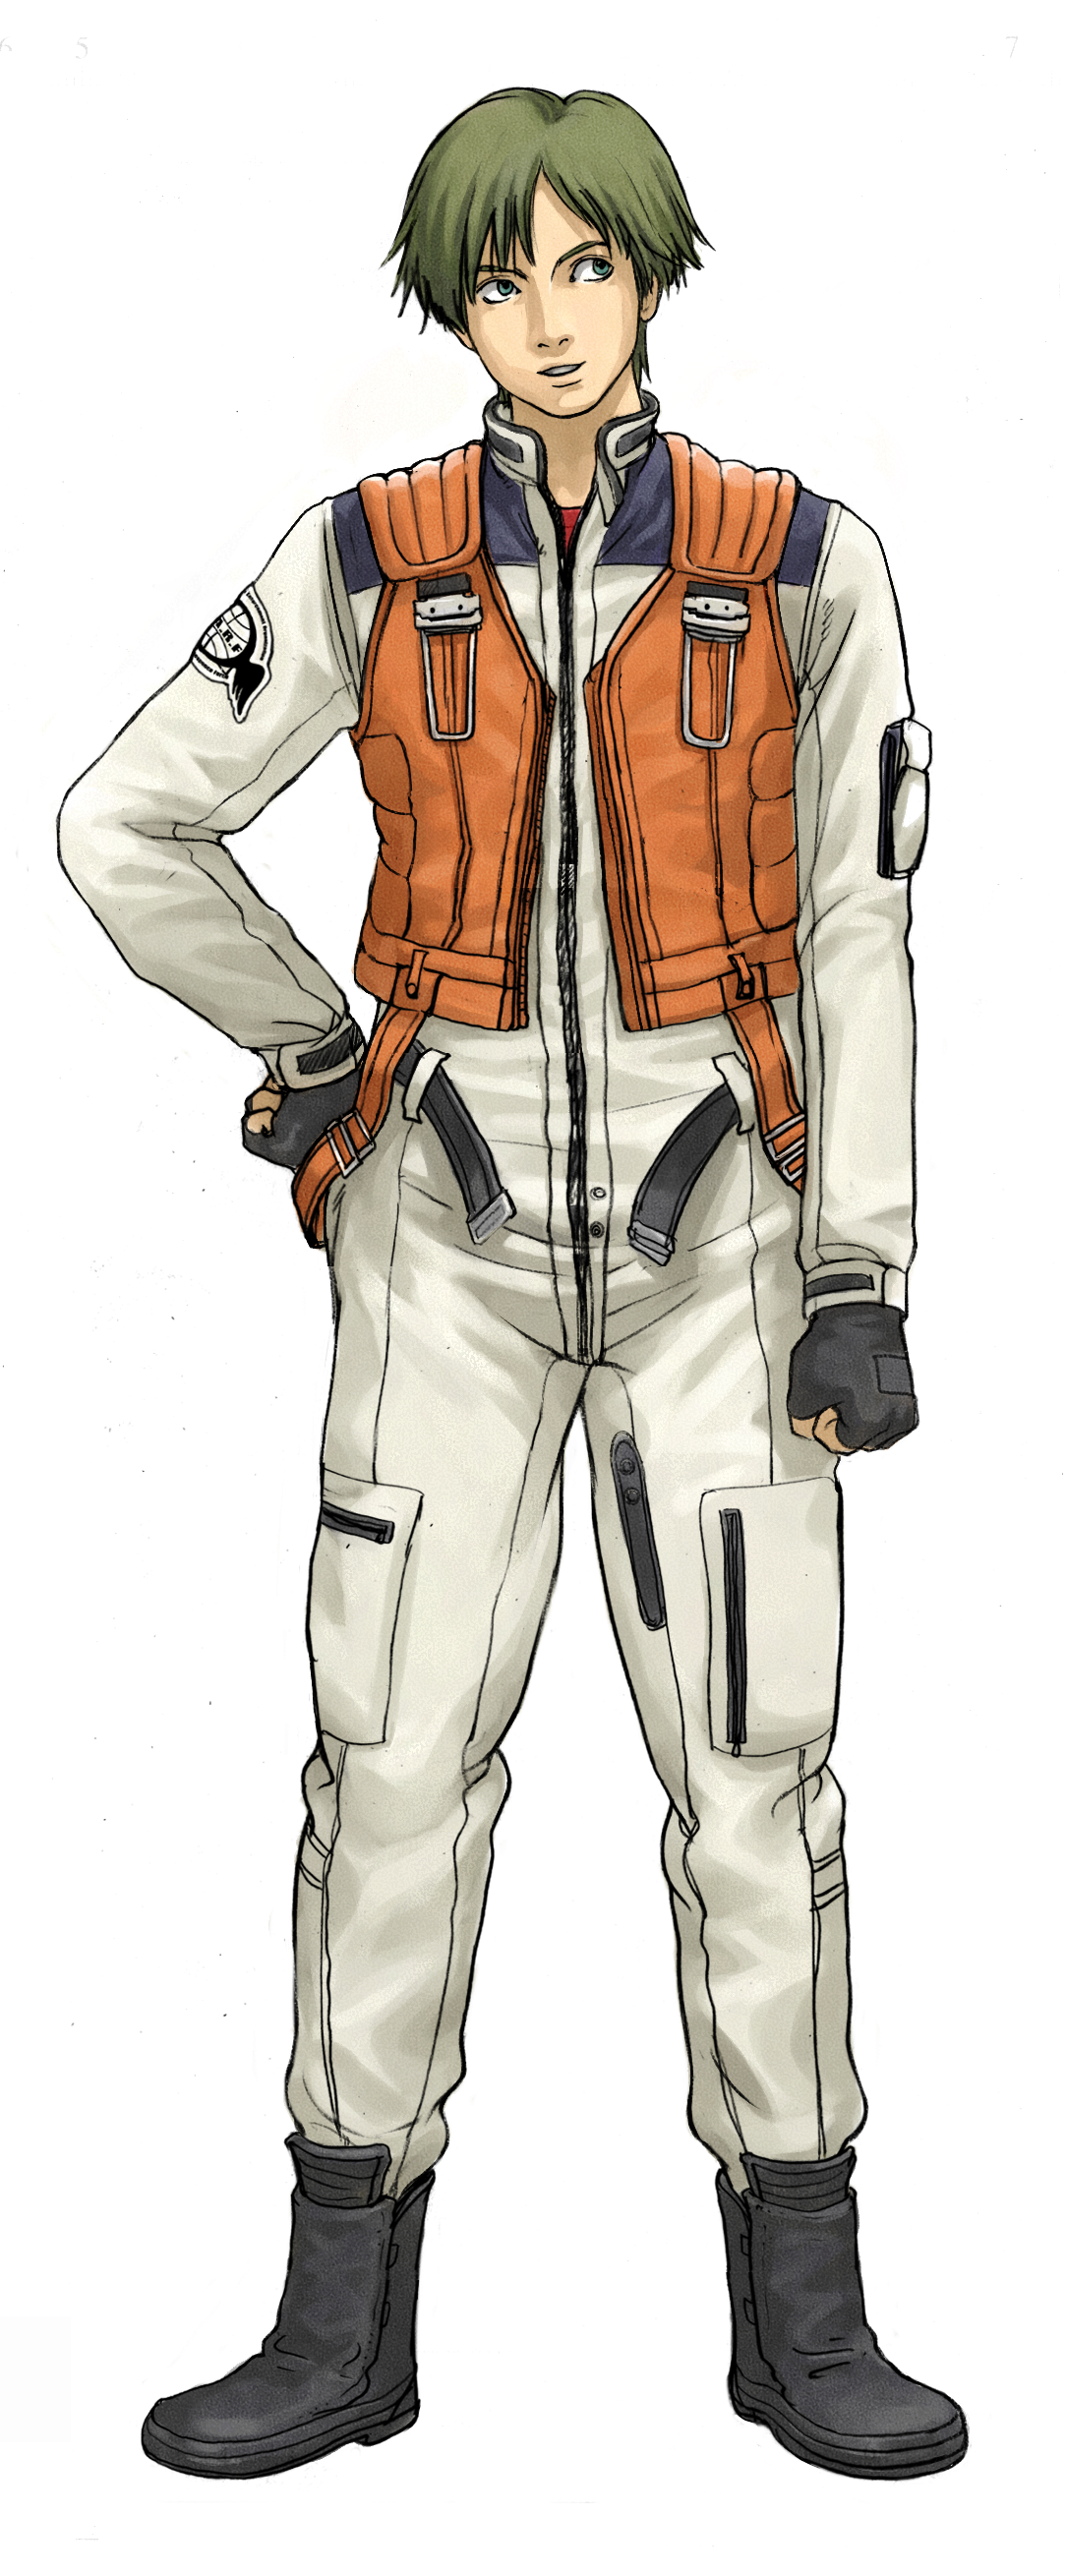 Erich from Ace Combat 3